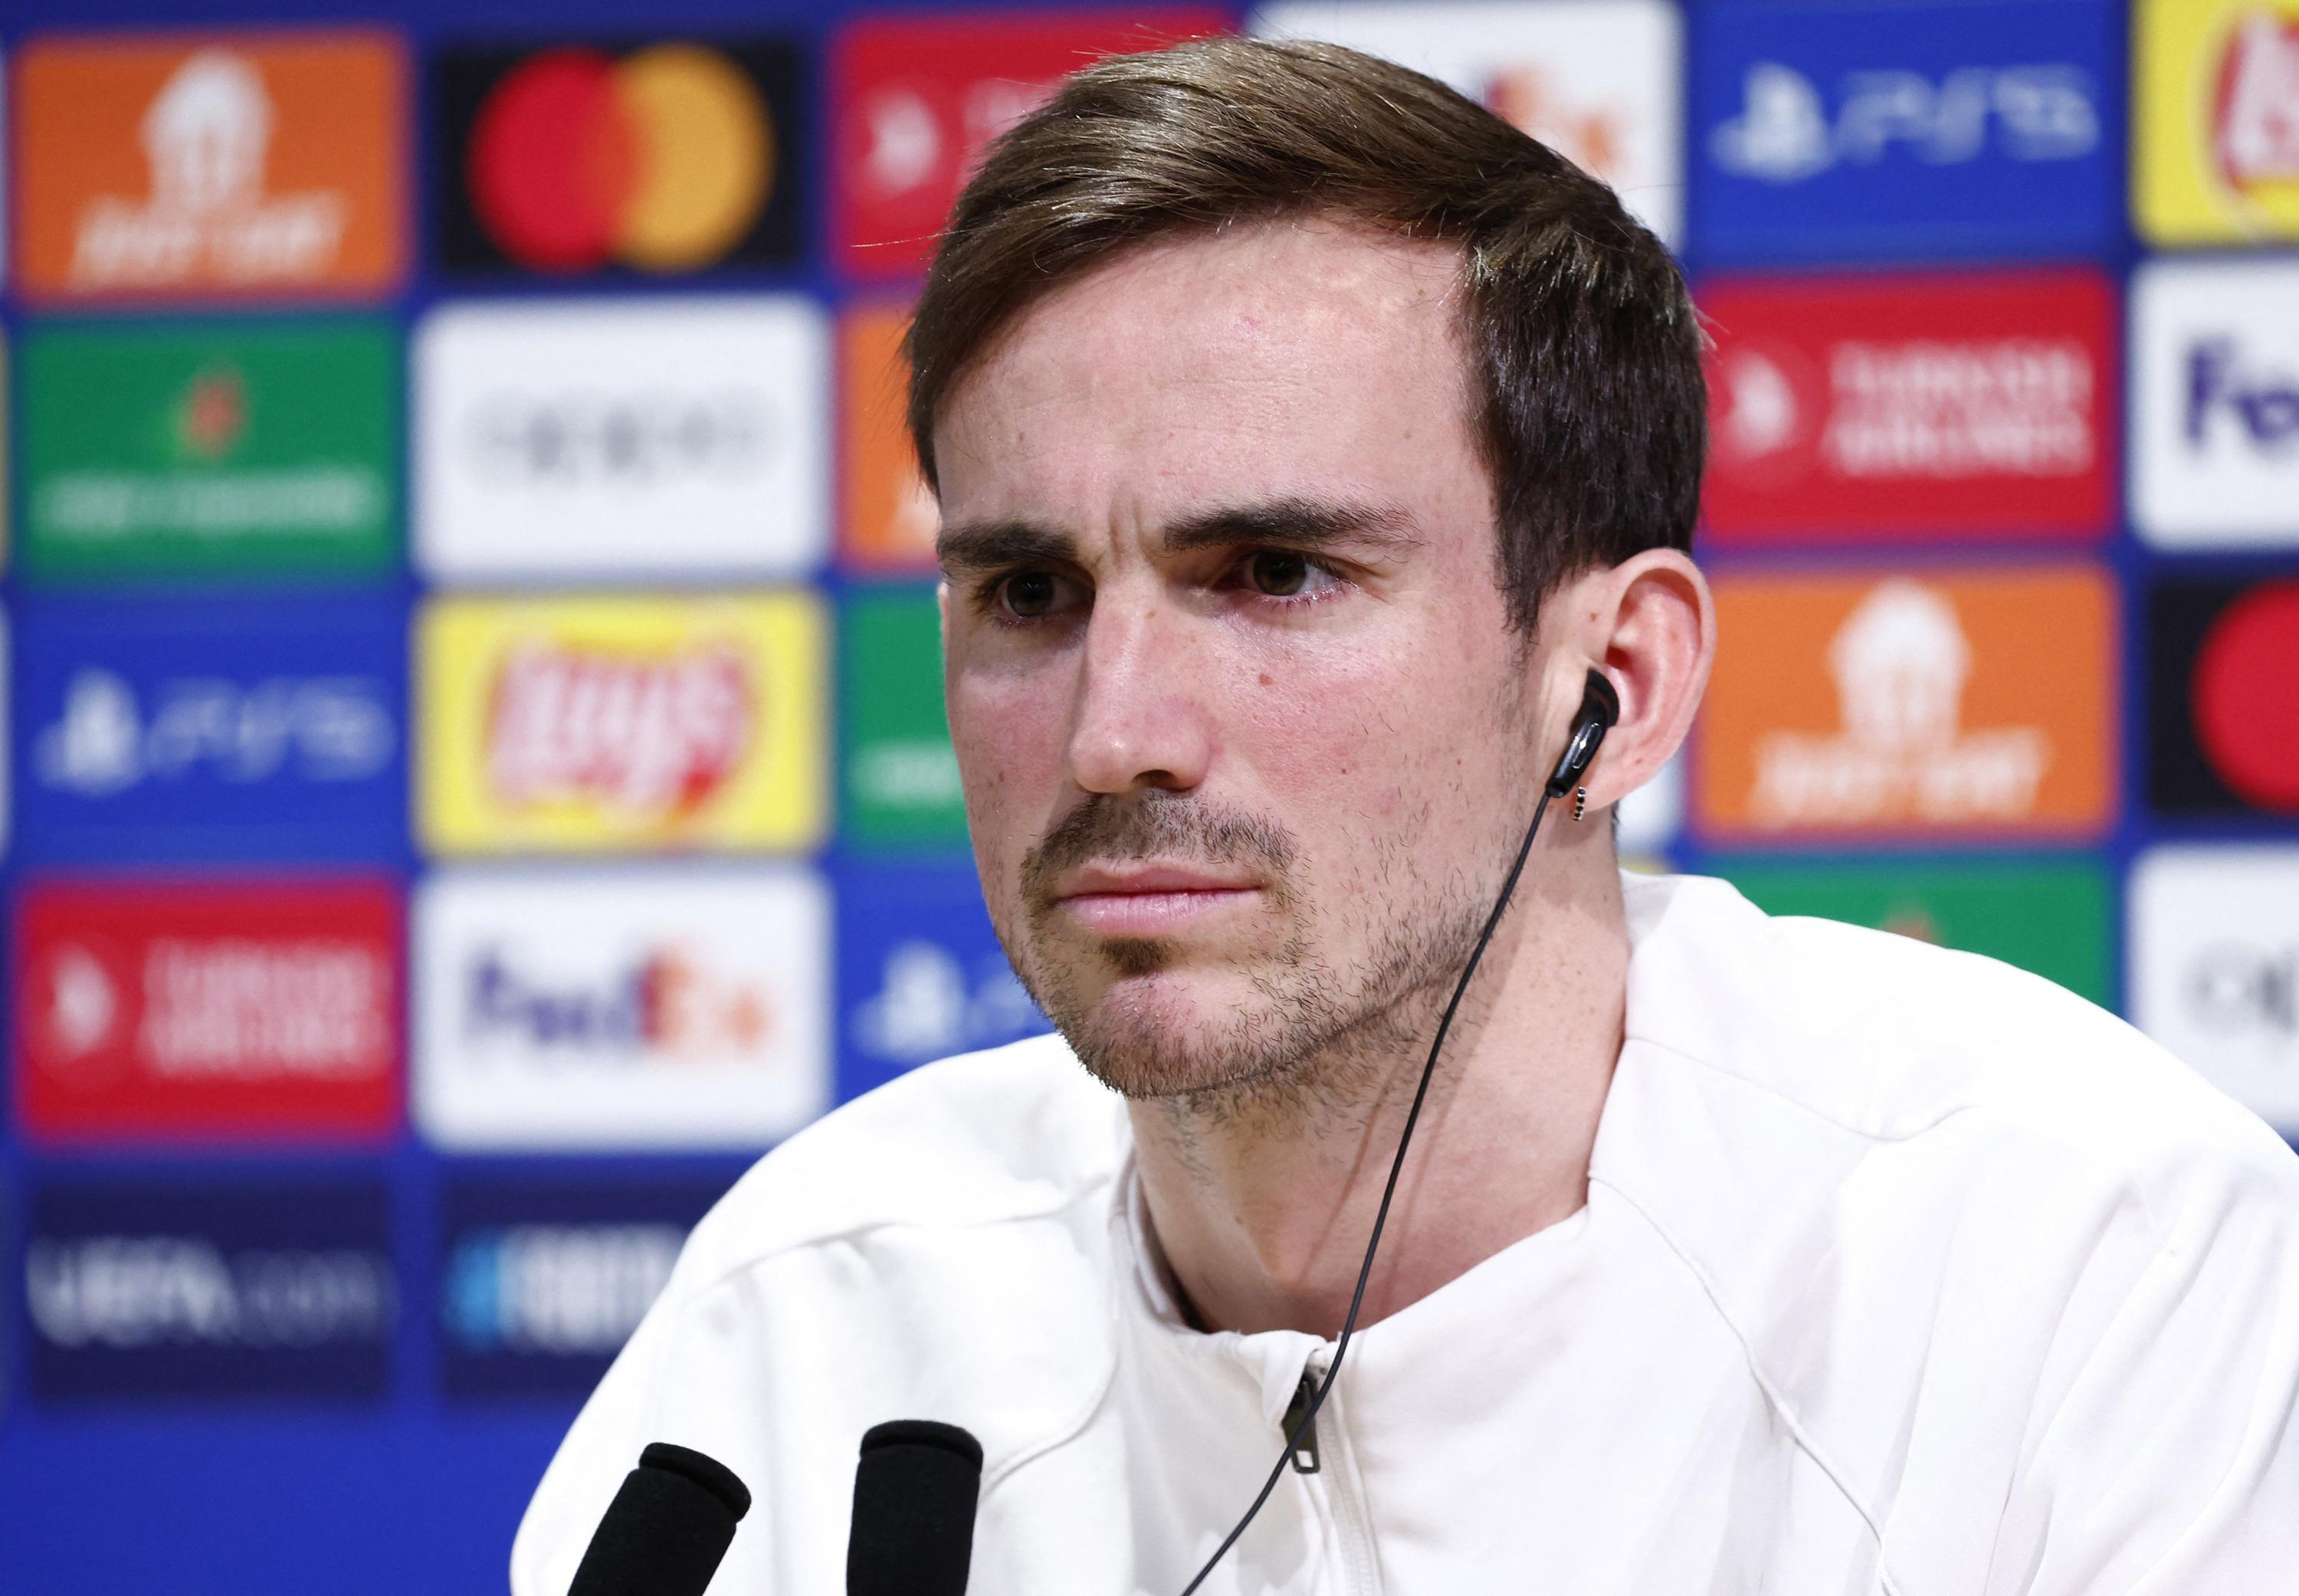 PSG-Real Sociedad: “We are not stressed, we just have a lot of enthusiasm”, swears Fabian Ruiz